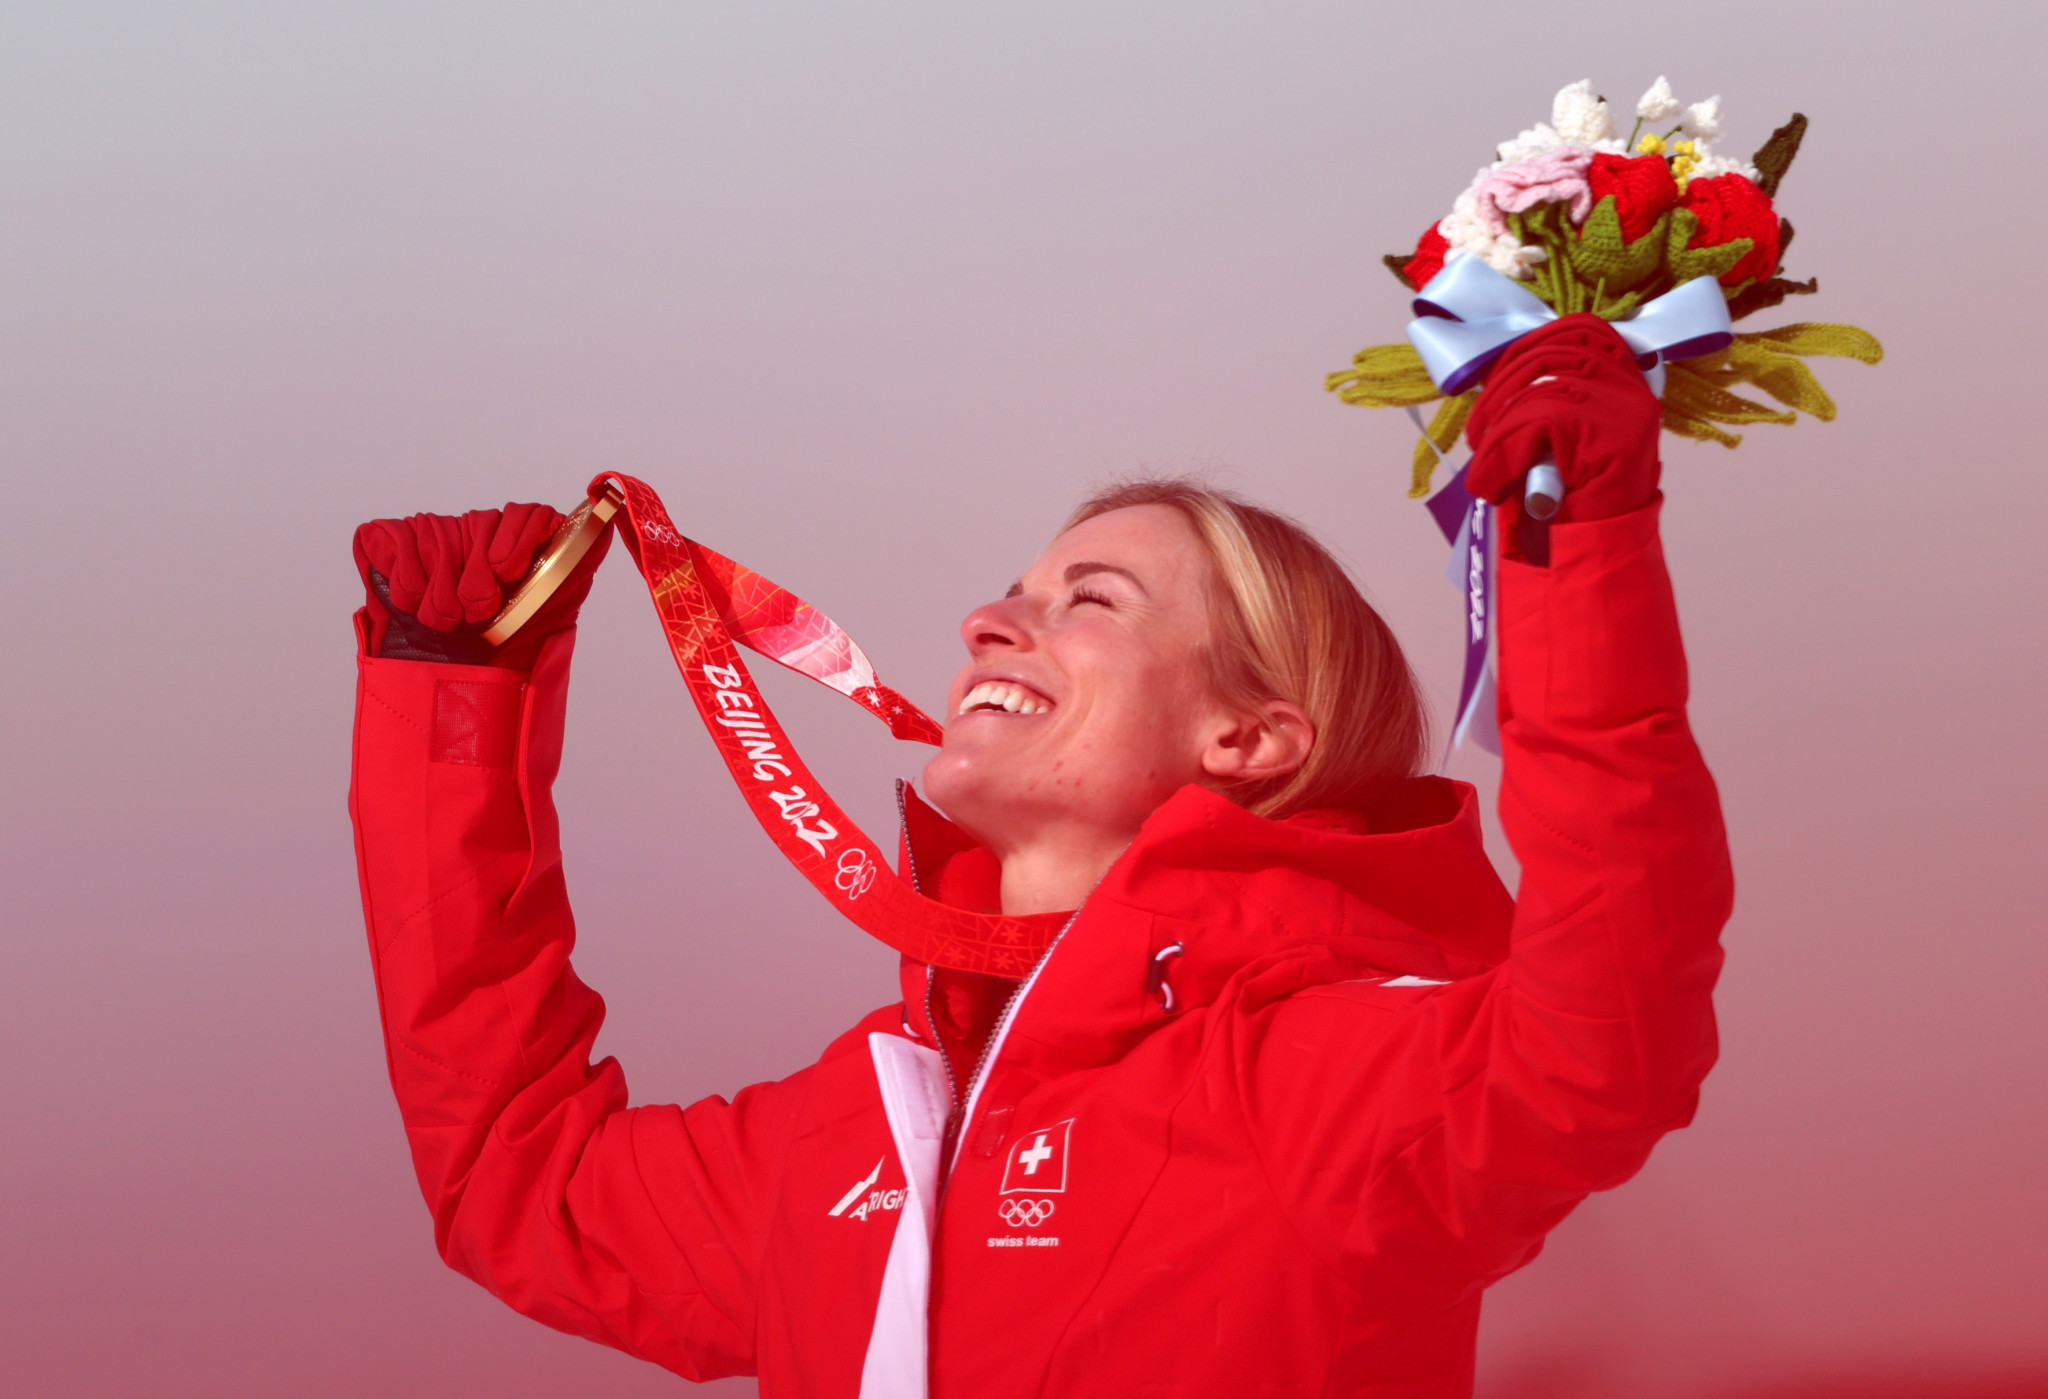 Gut-Behrami crowned Olympic champion with women's super-G win at Beijing 2022